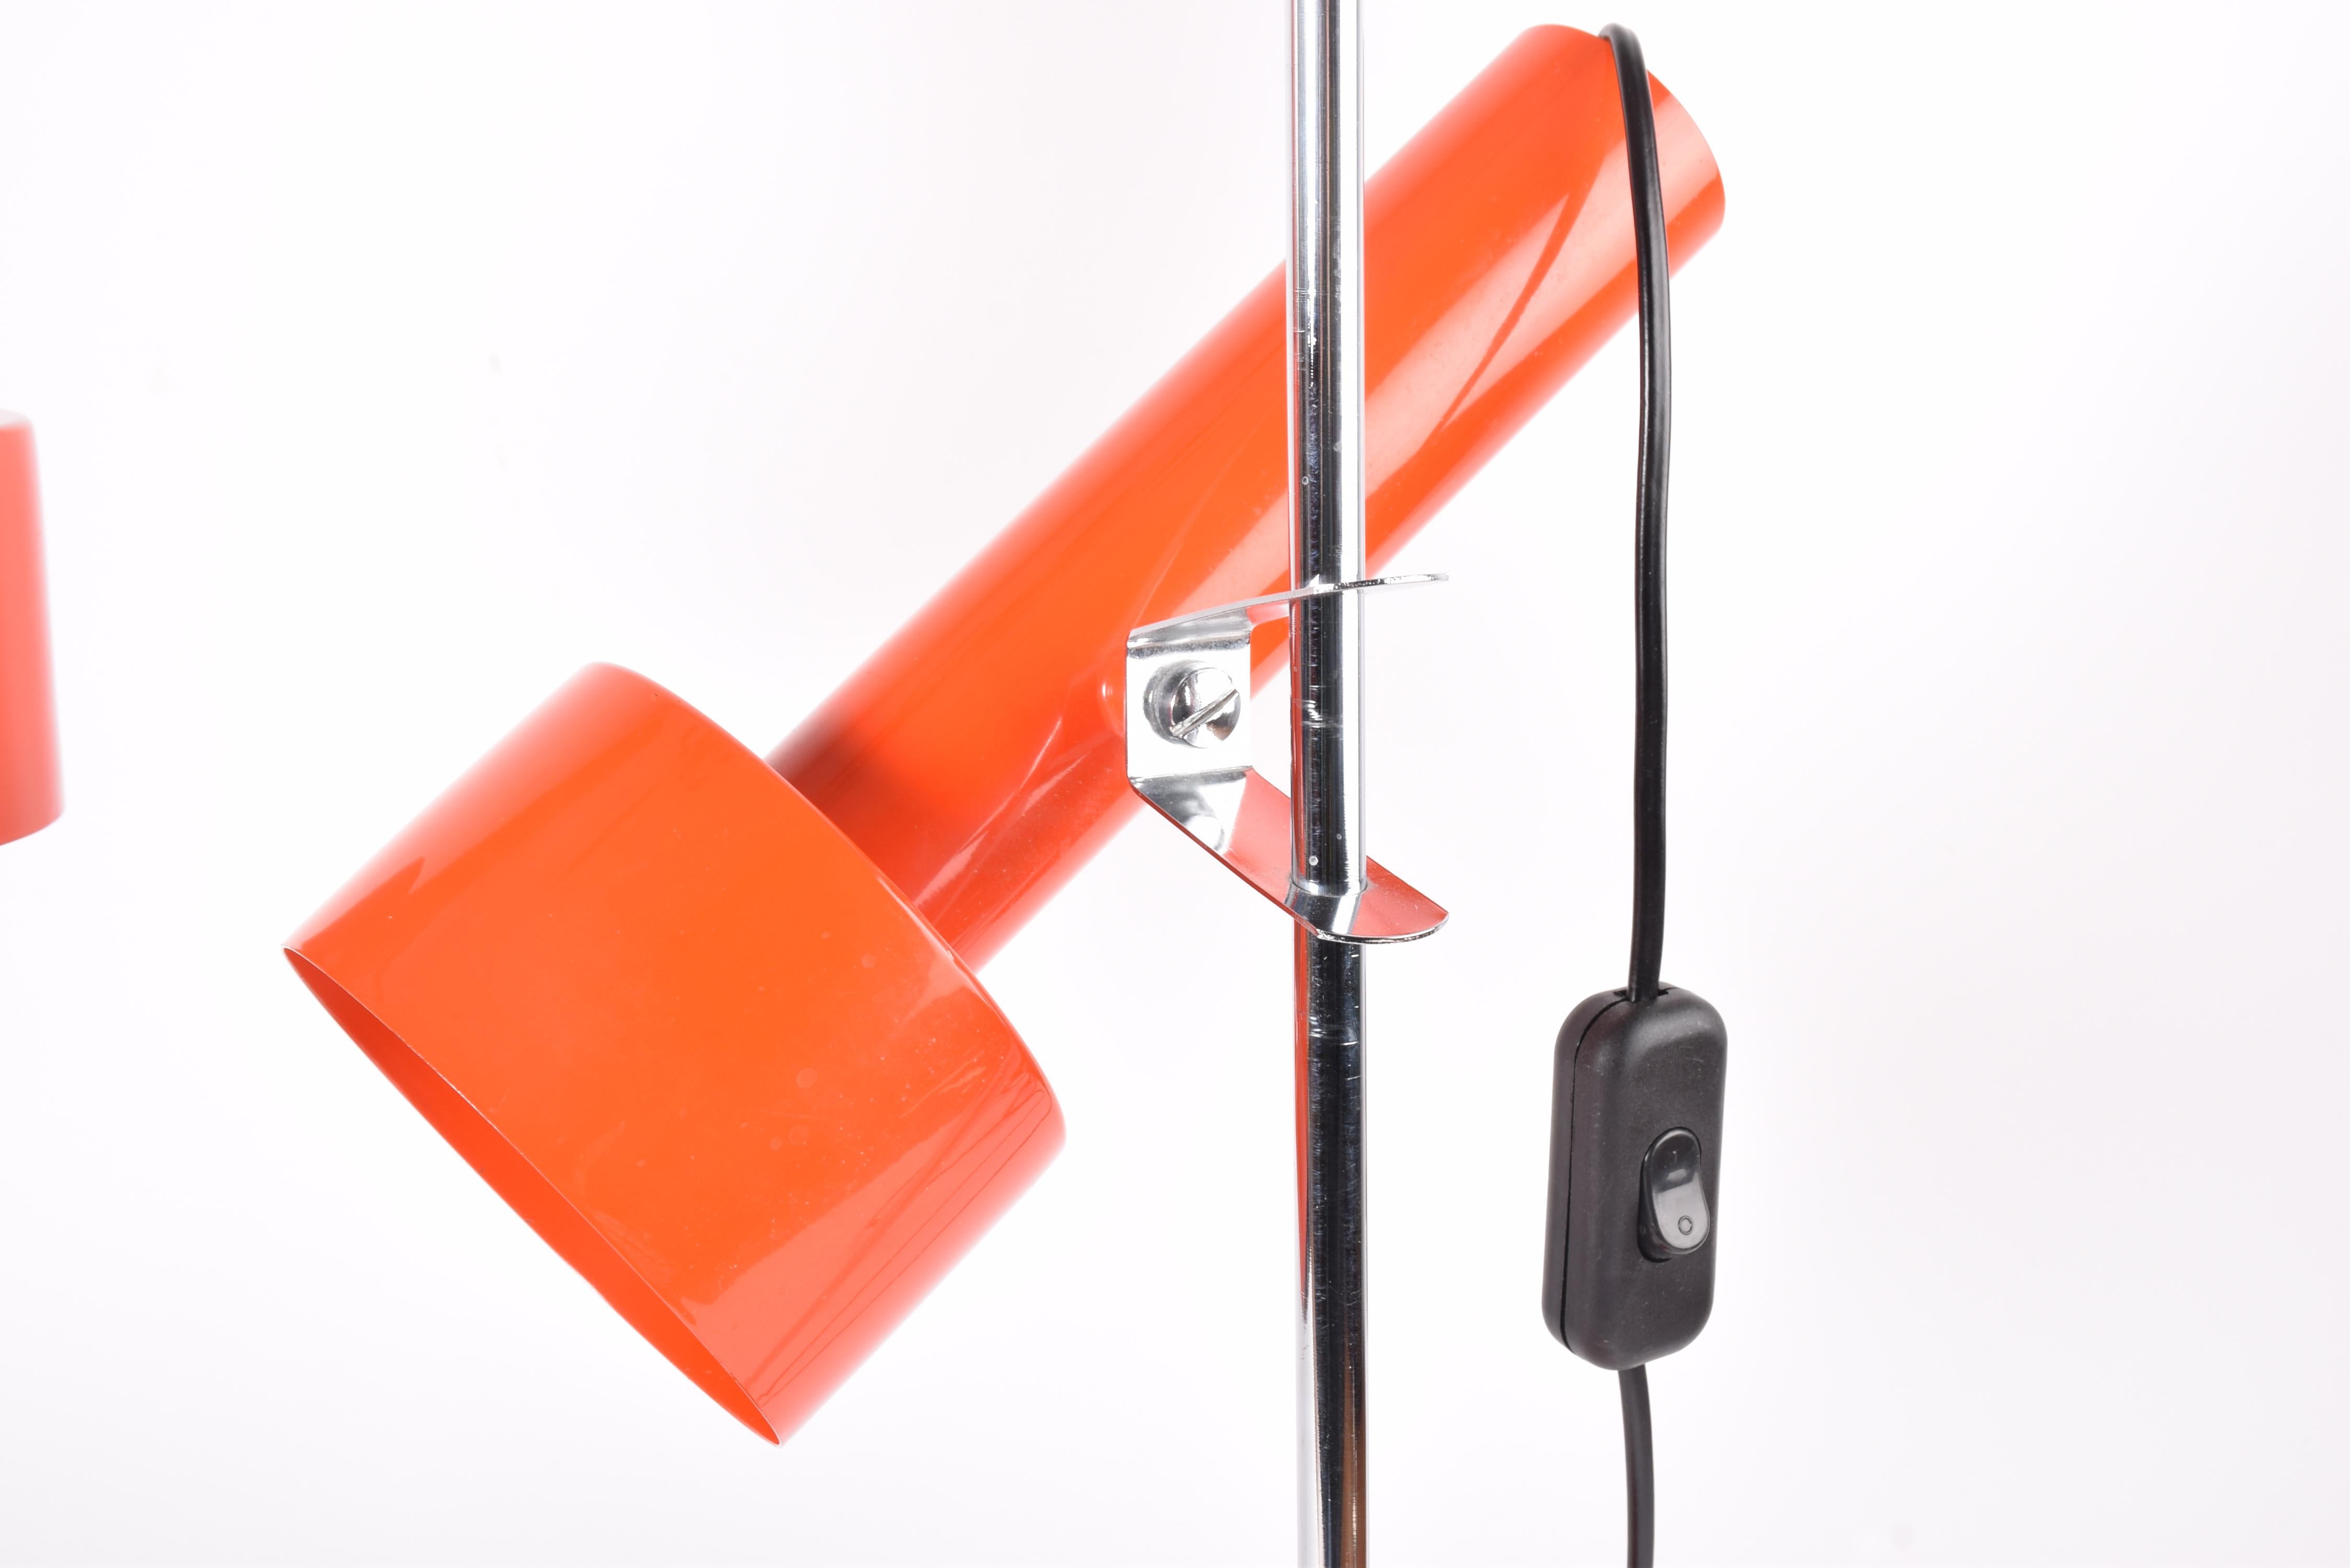 Enameled Pair of Scandinavian Modern Desk Table Lamps, Orange Lacquer and Metal, 1970s For Sale